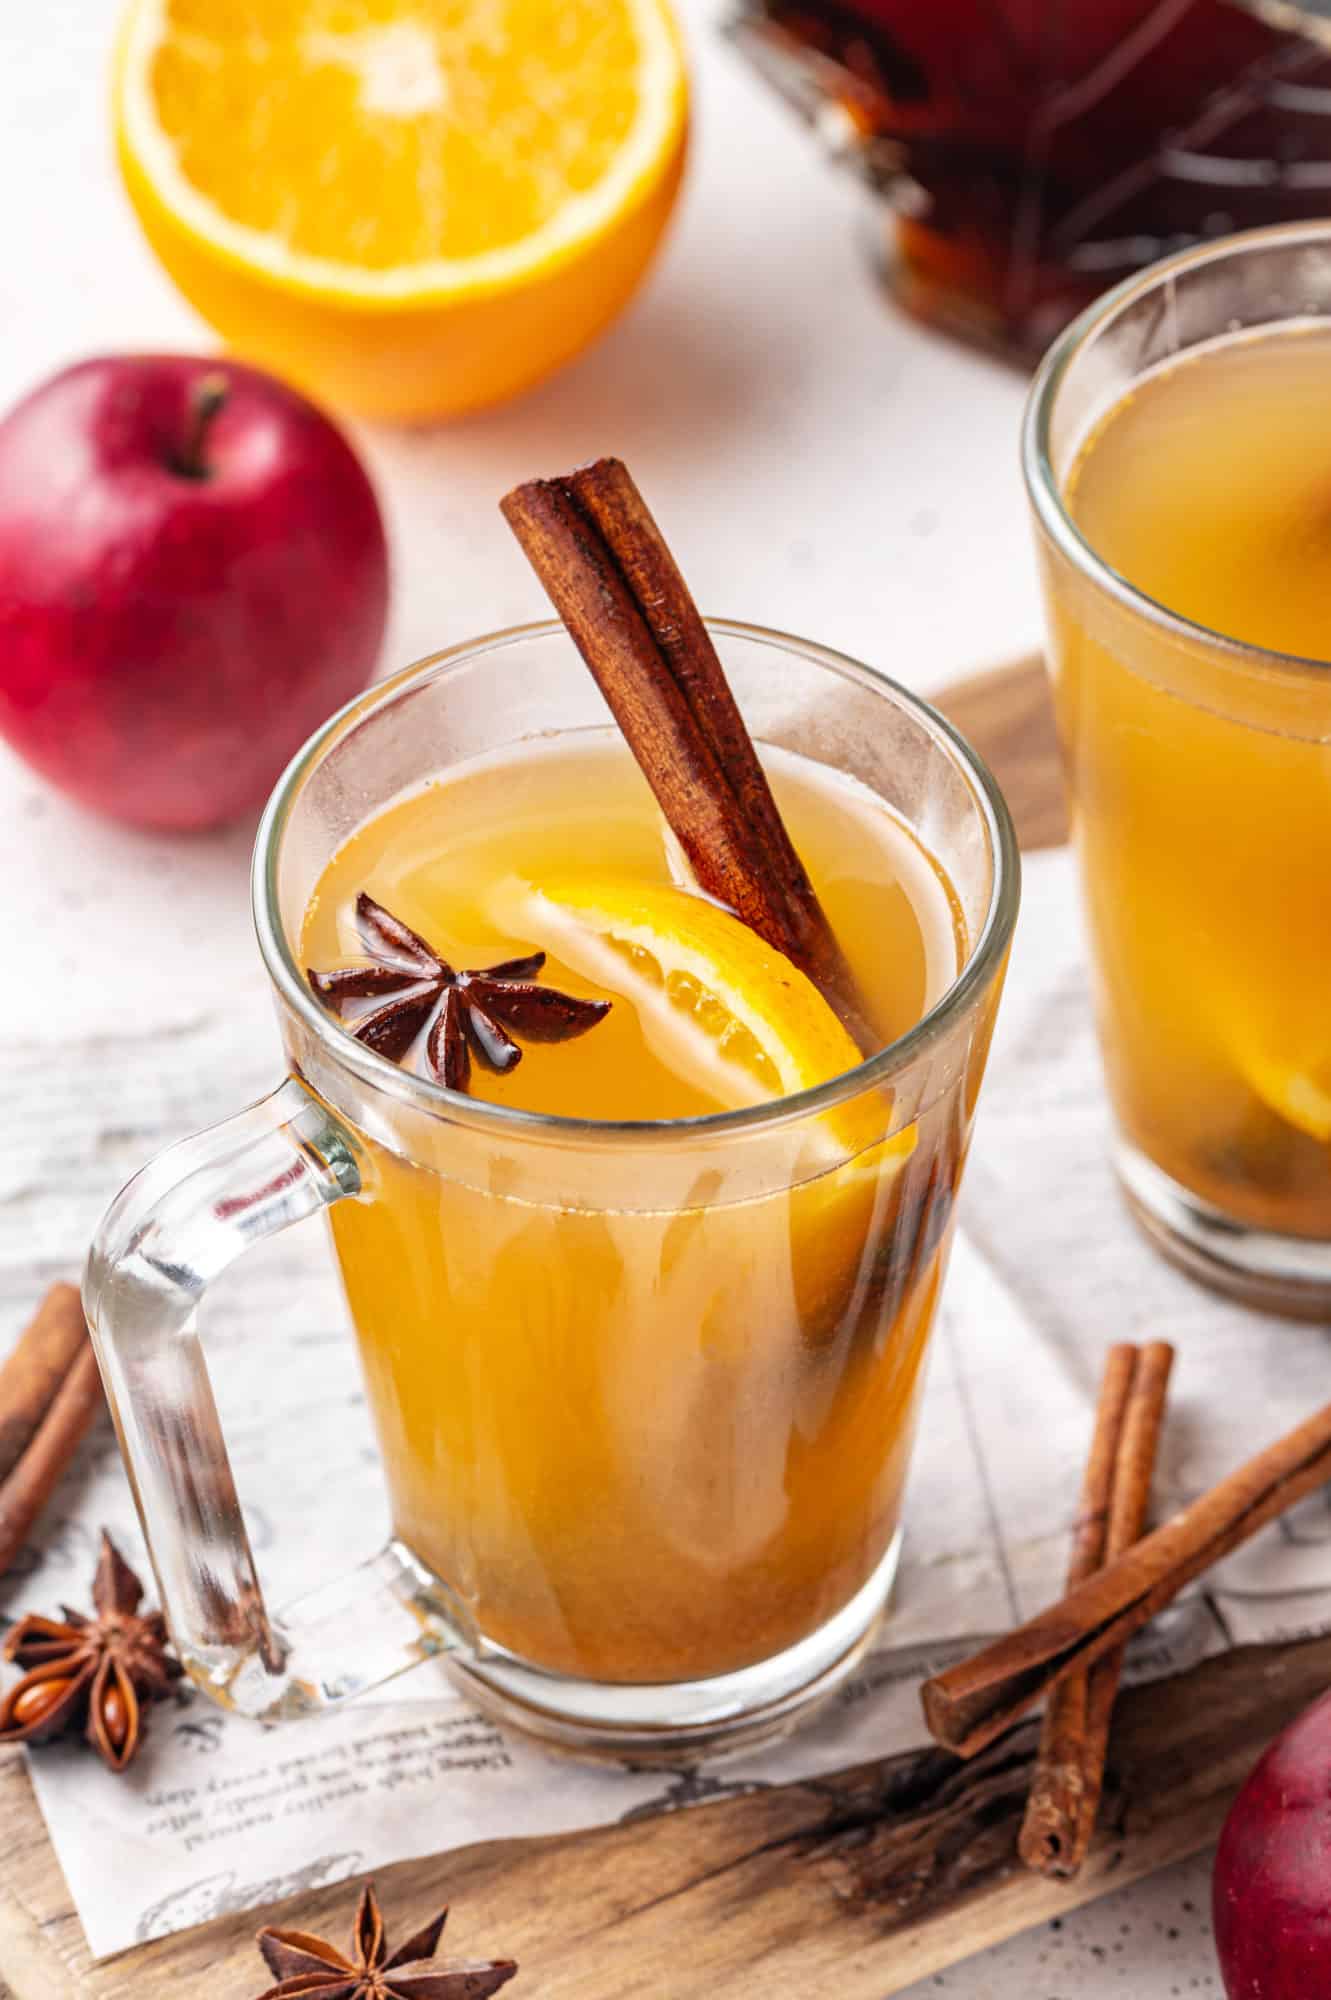 apple cider in a glass mug with orange cinnamon and star anise in the cider.